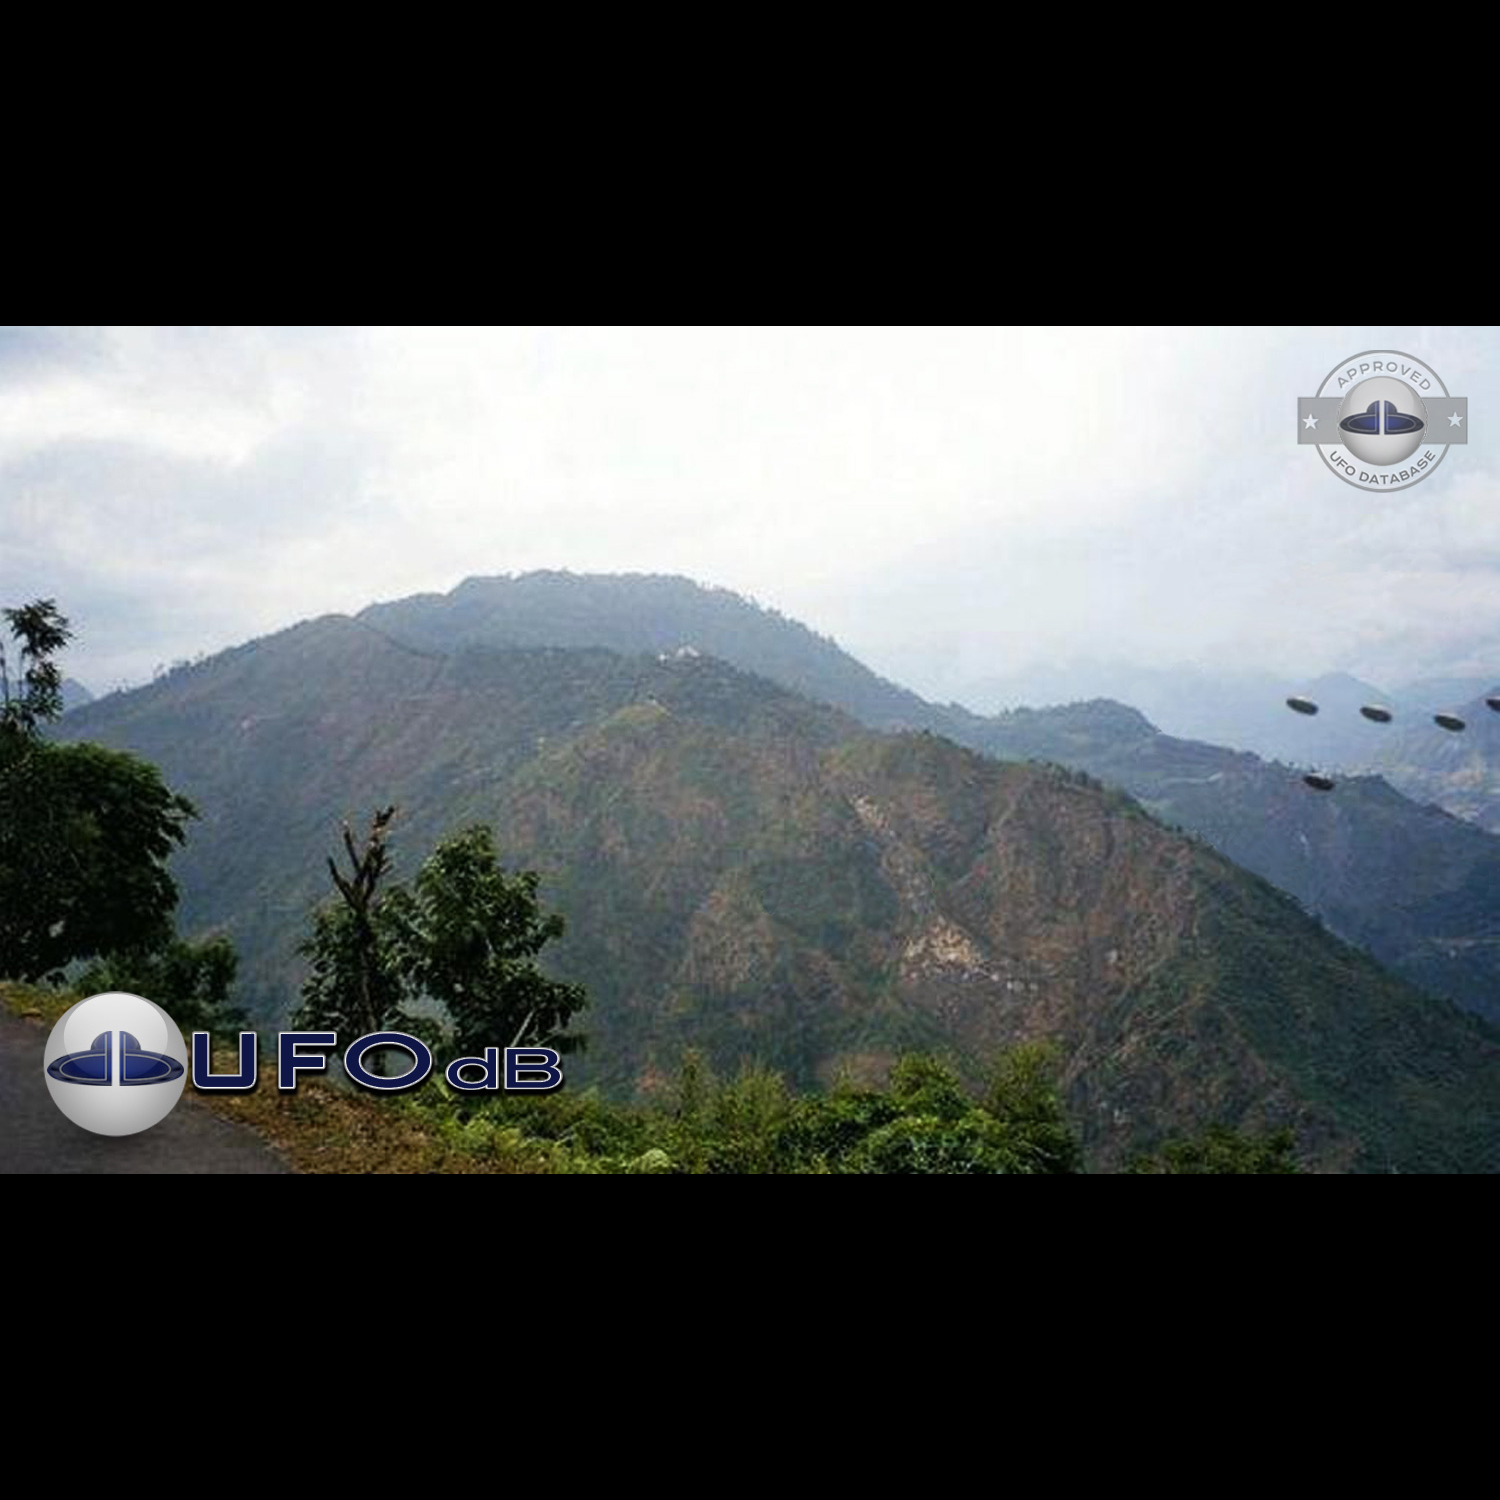 Fleet of 5 UFOs flying in precise formation Hills of Sombaria Gangtok UFO Picture #202-1